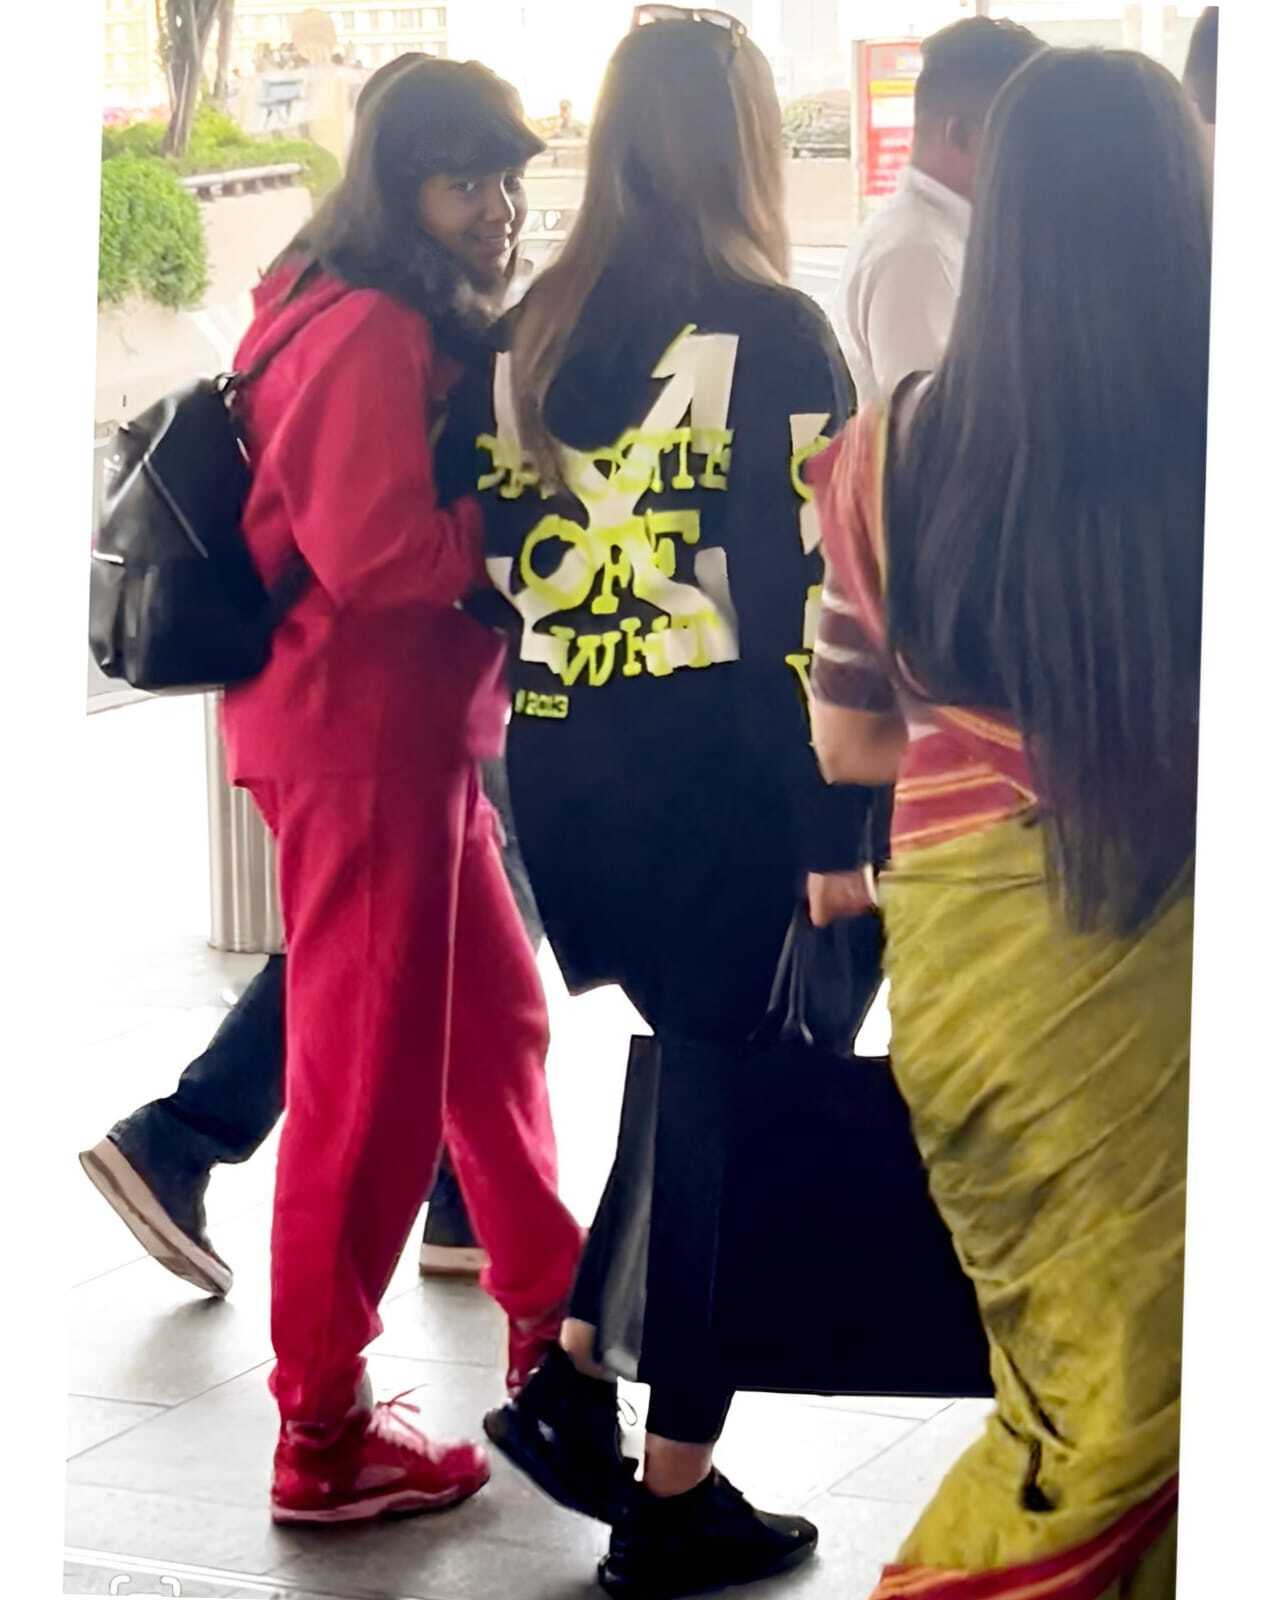 Aishwarya Rai Bachchan and her daughter Aaradhya were seen at the Mumbai airport on Sunday afternoon